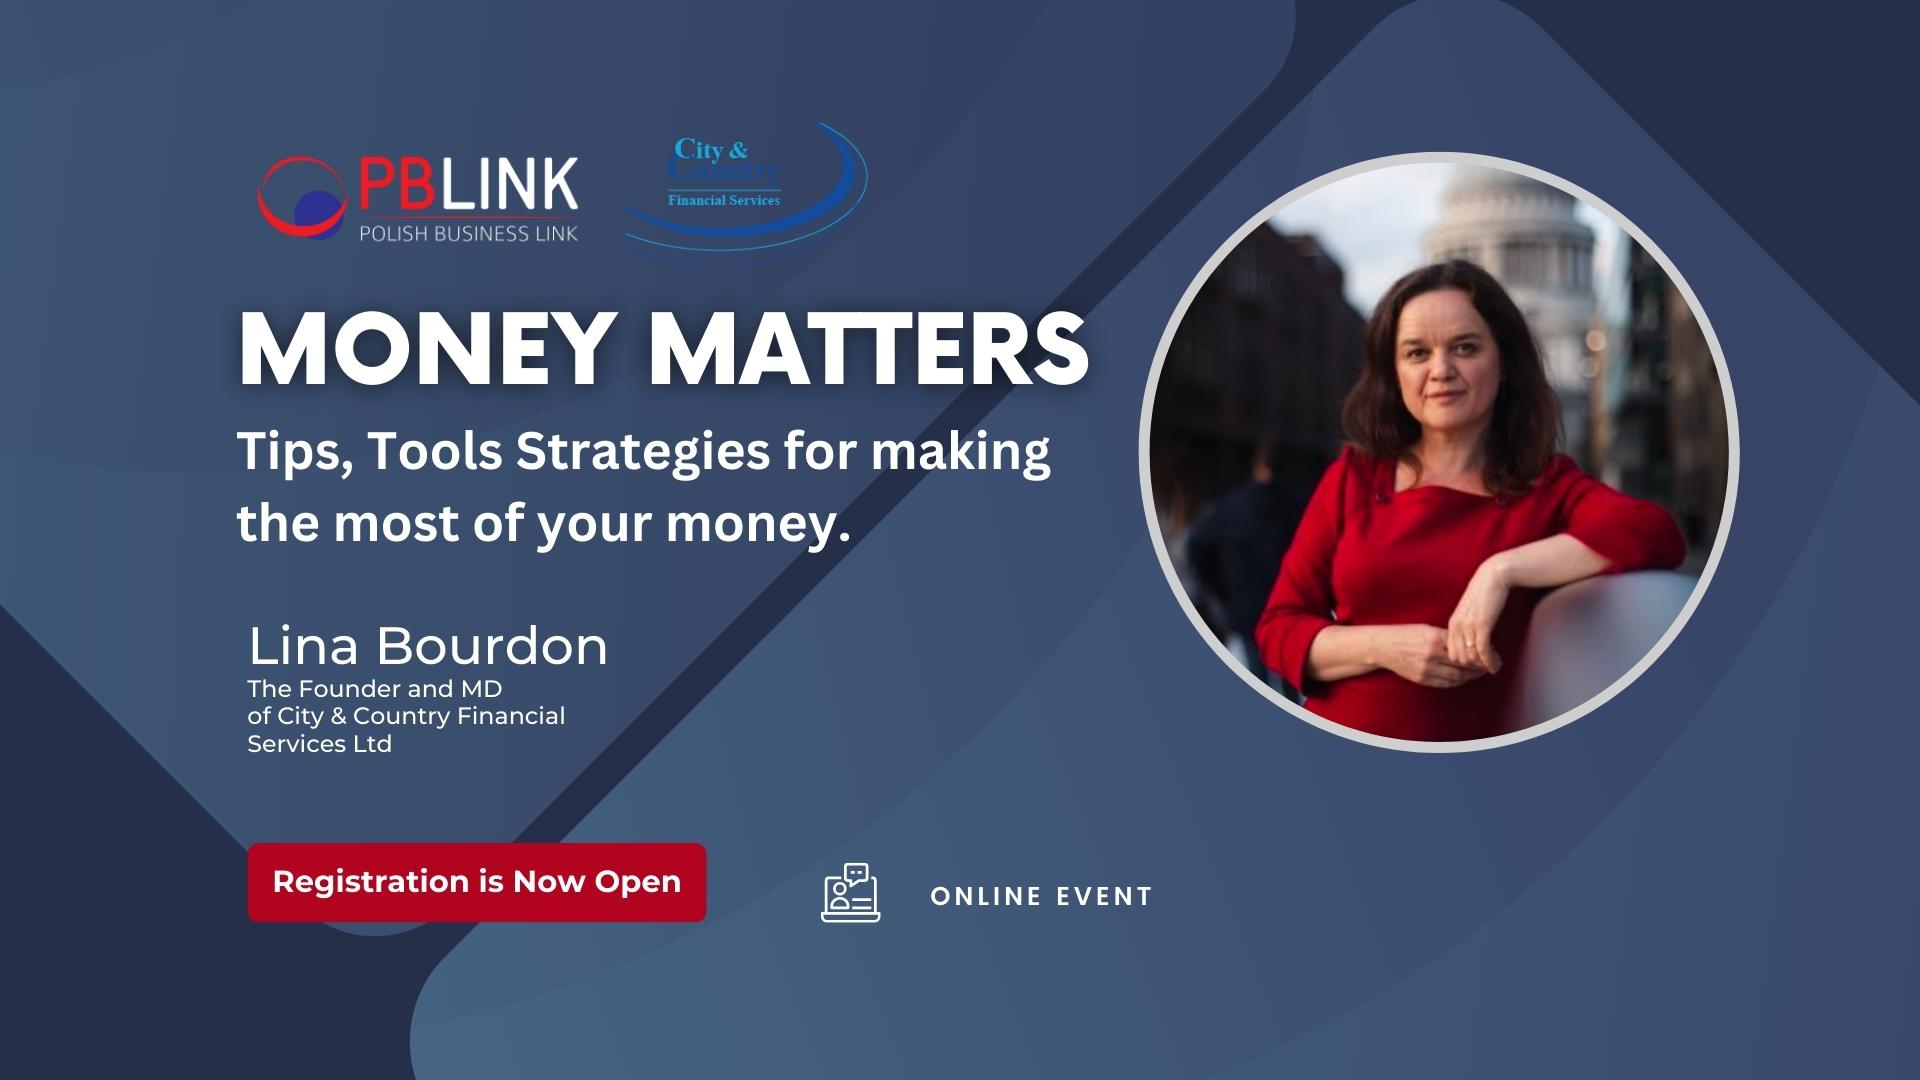 Money Matters: Tips, Tools Strategies for making the most of your money 21.02.23